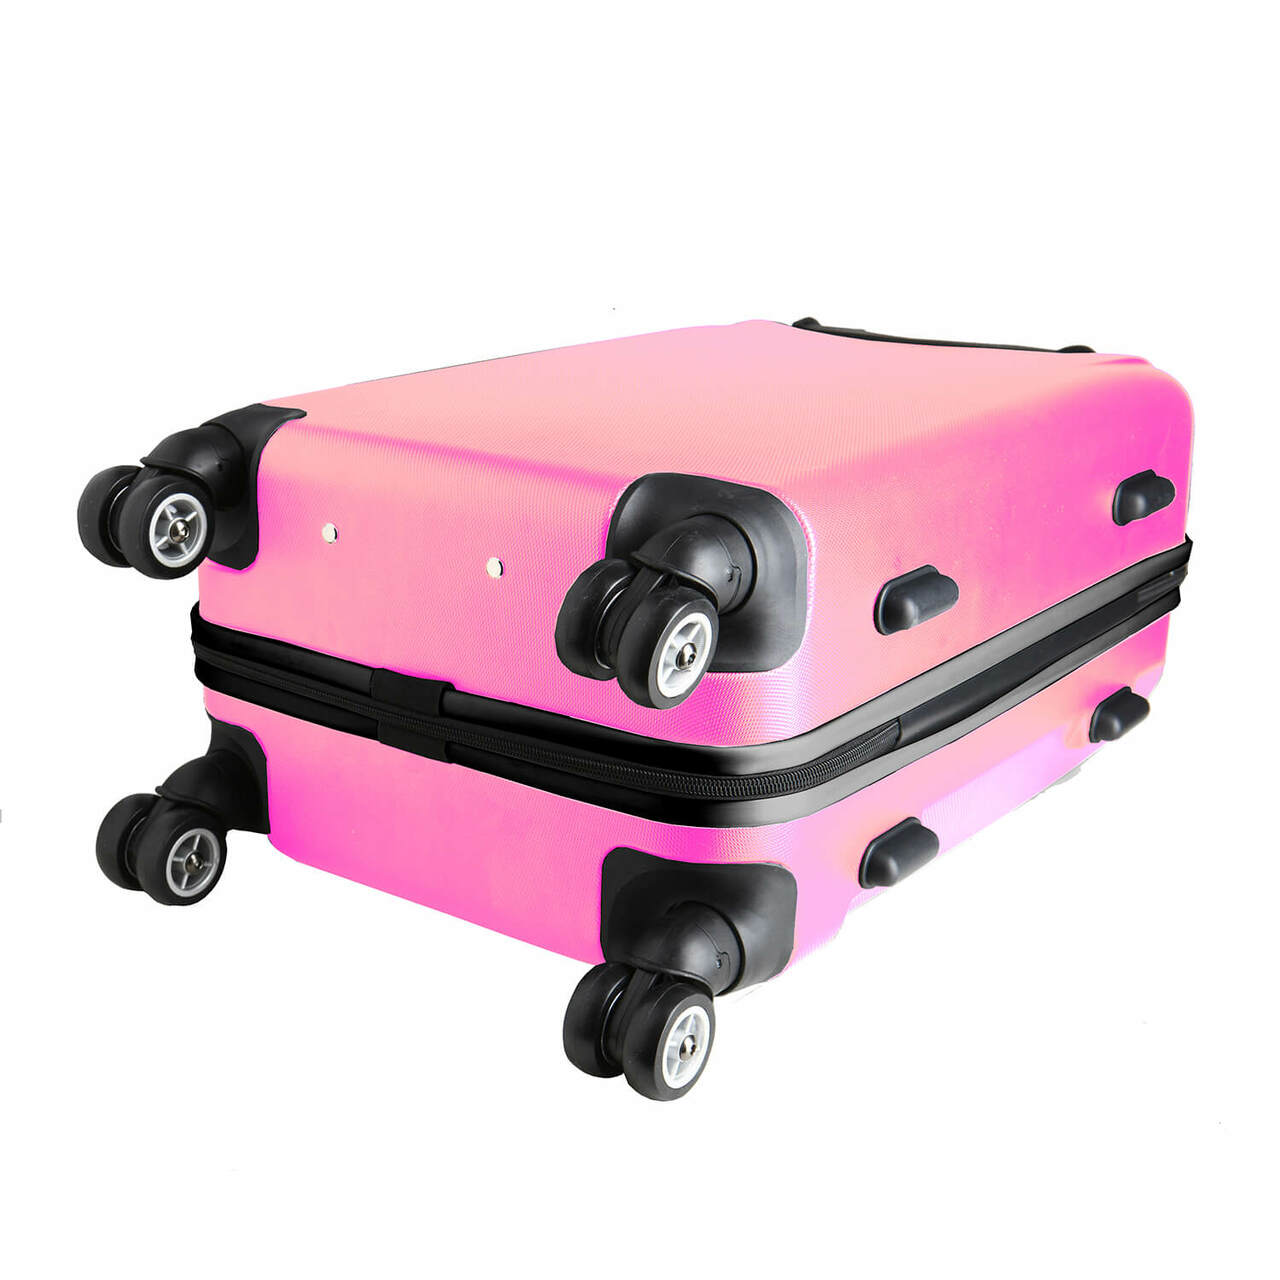 Appalachian State20" Pink Domestic Carry-on Spinner